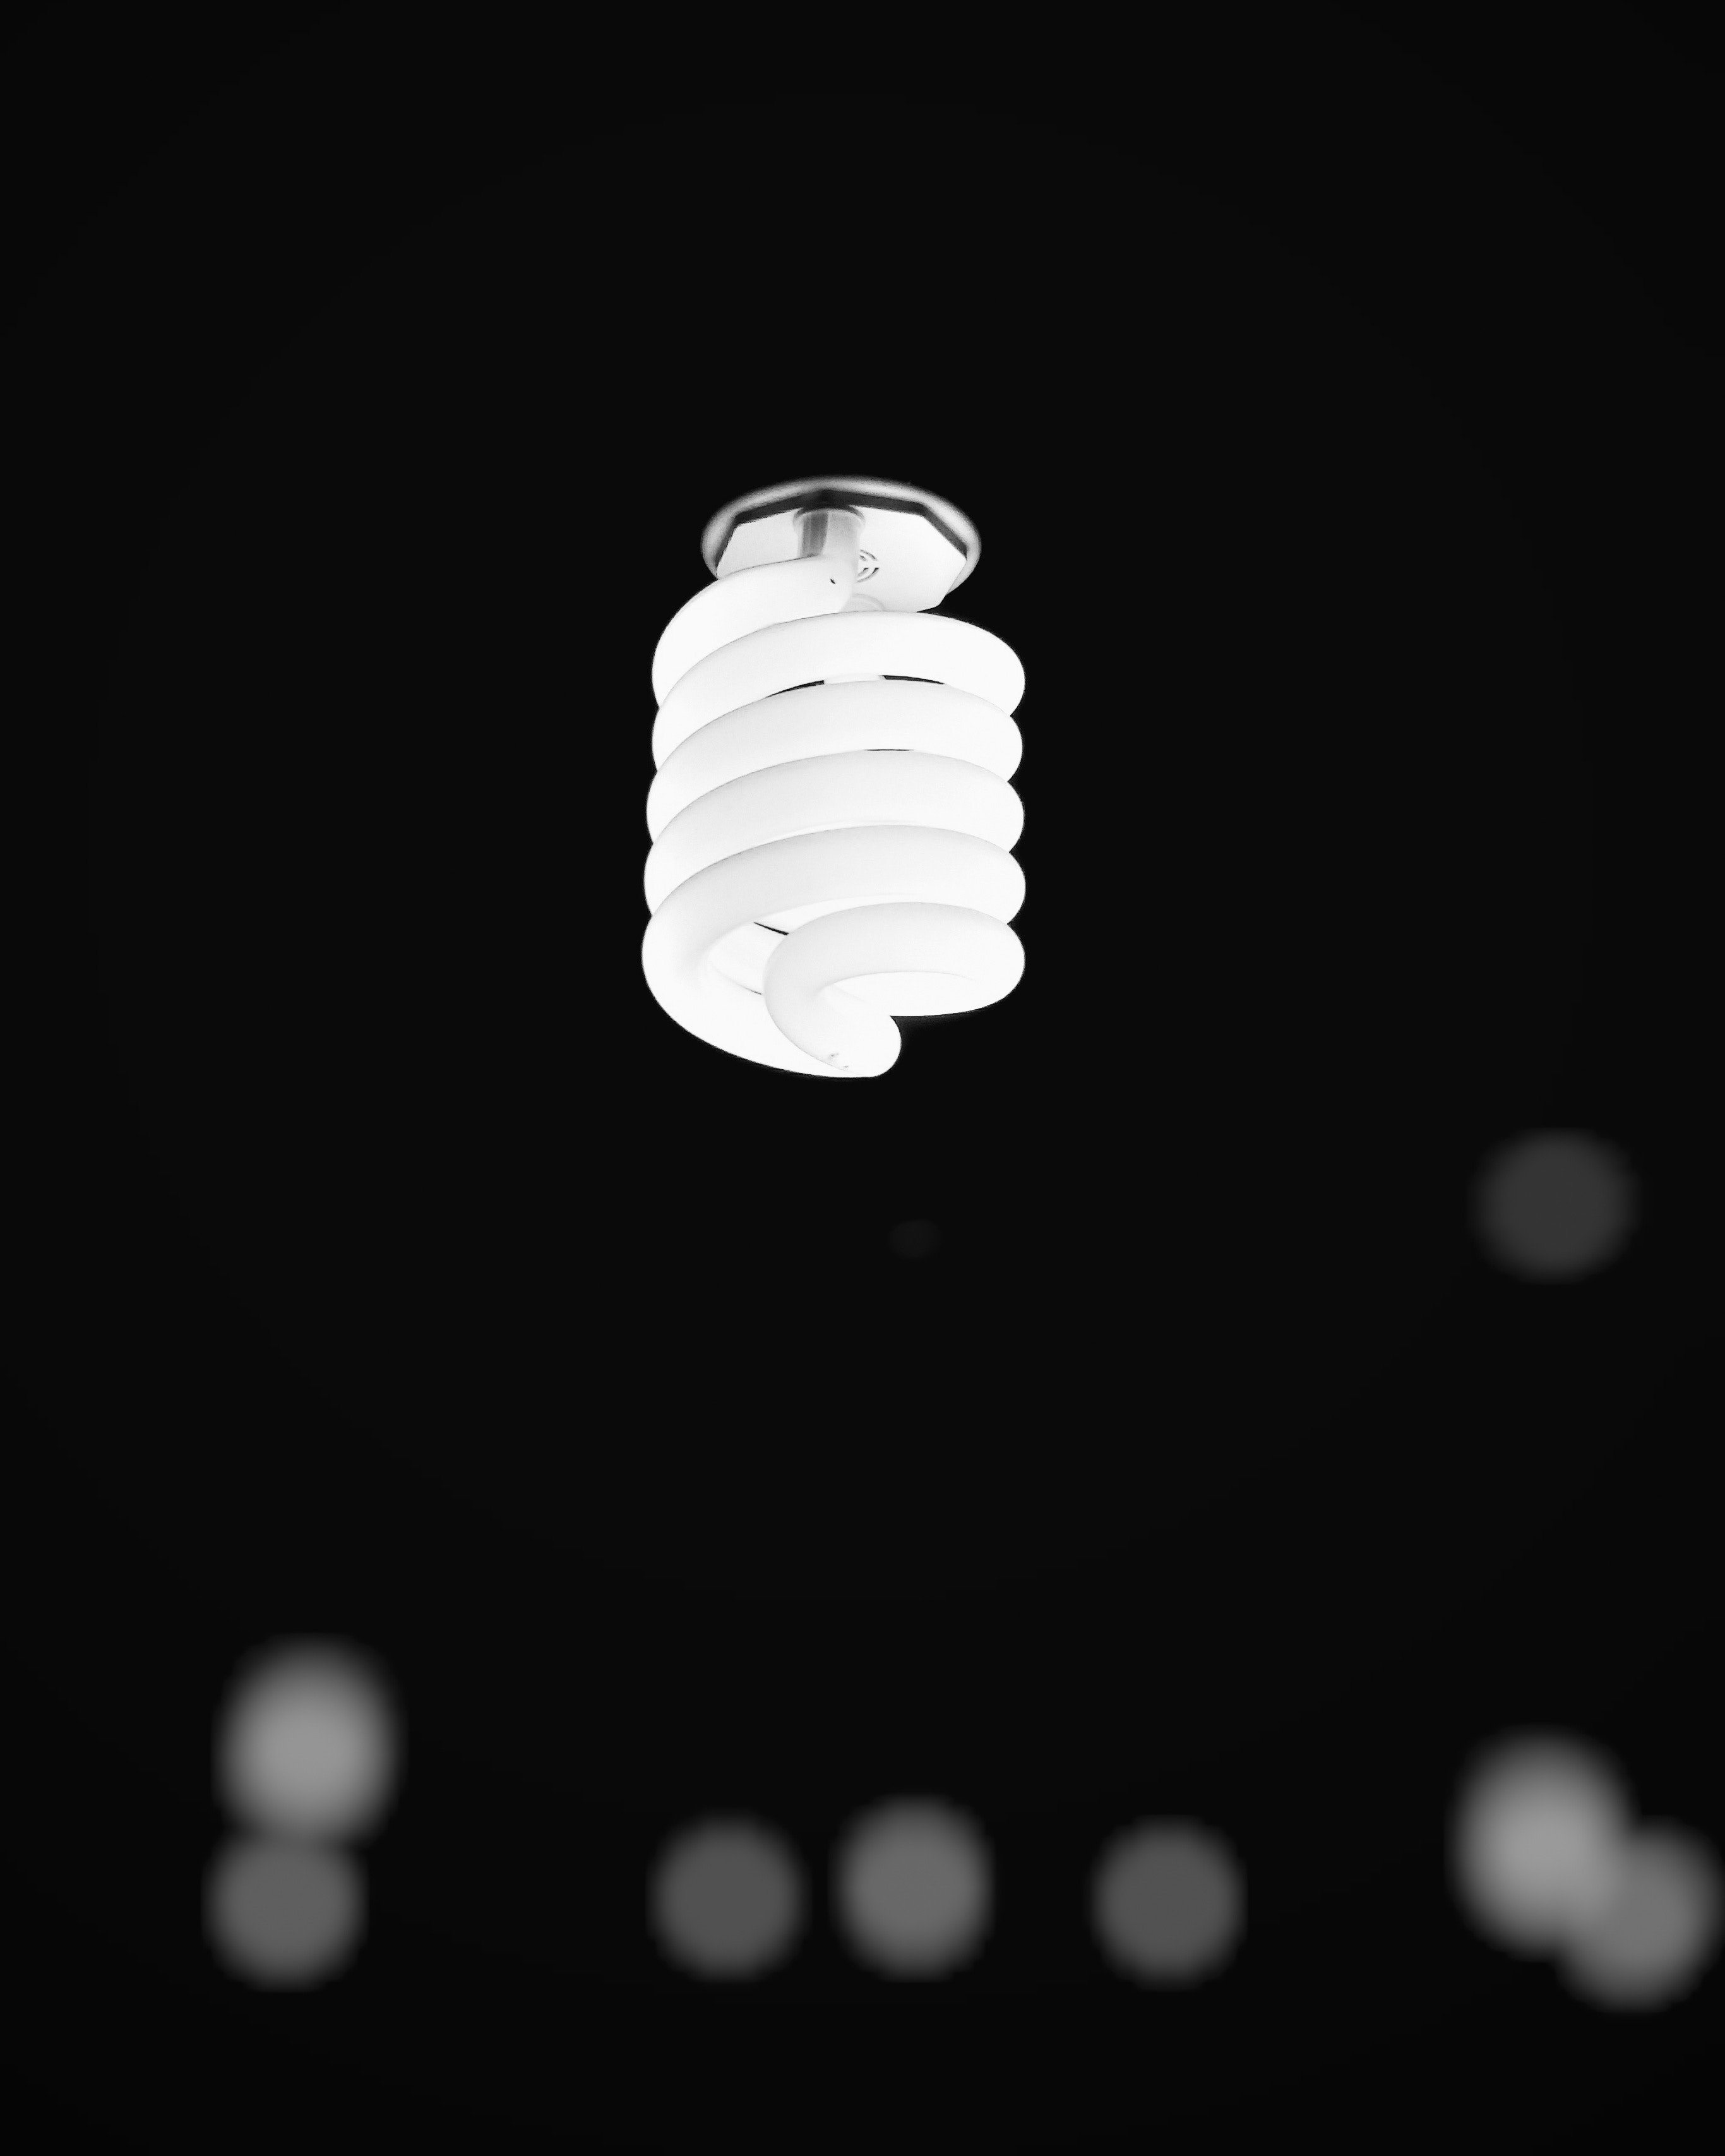 light bulb, electricity, black, illumination, bw, chb, spiral, lighting wallpapers for tablet